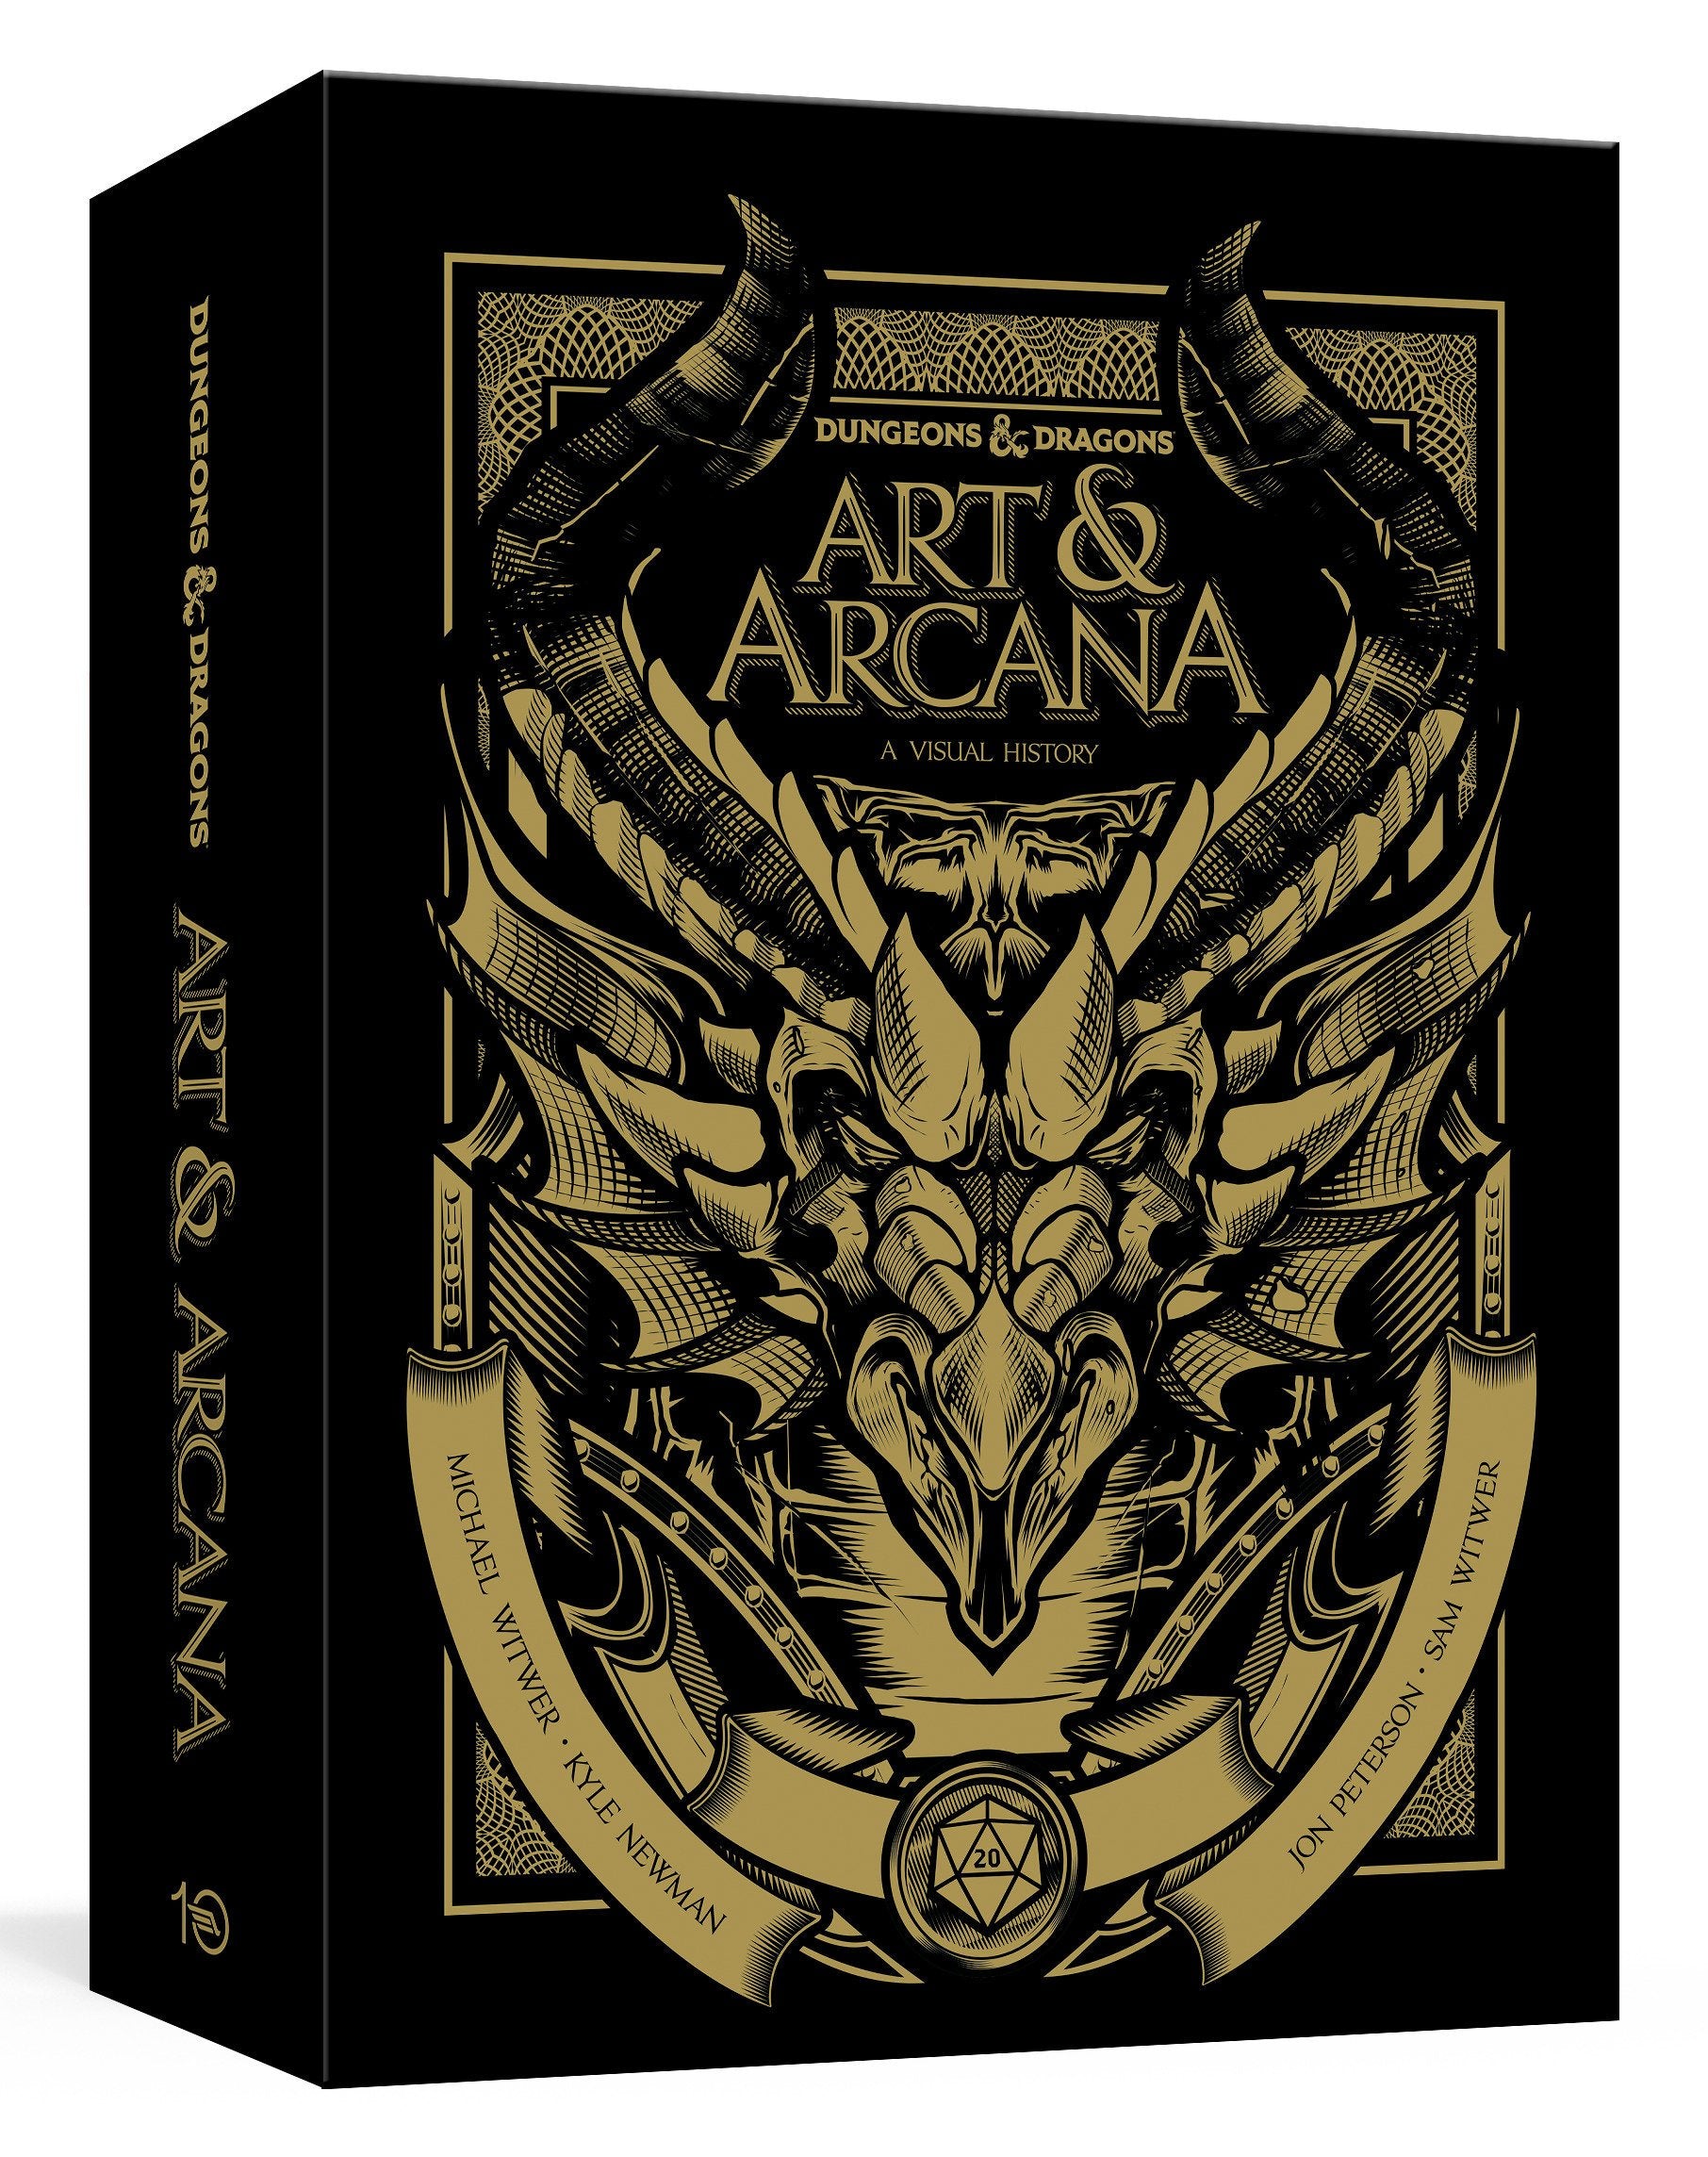 Dungeons & Dragons Art & Arcana: A Visual History (Special Edition)